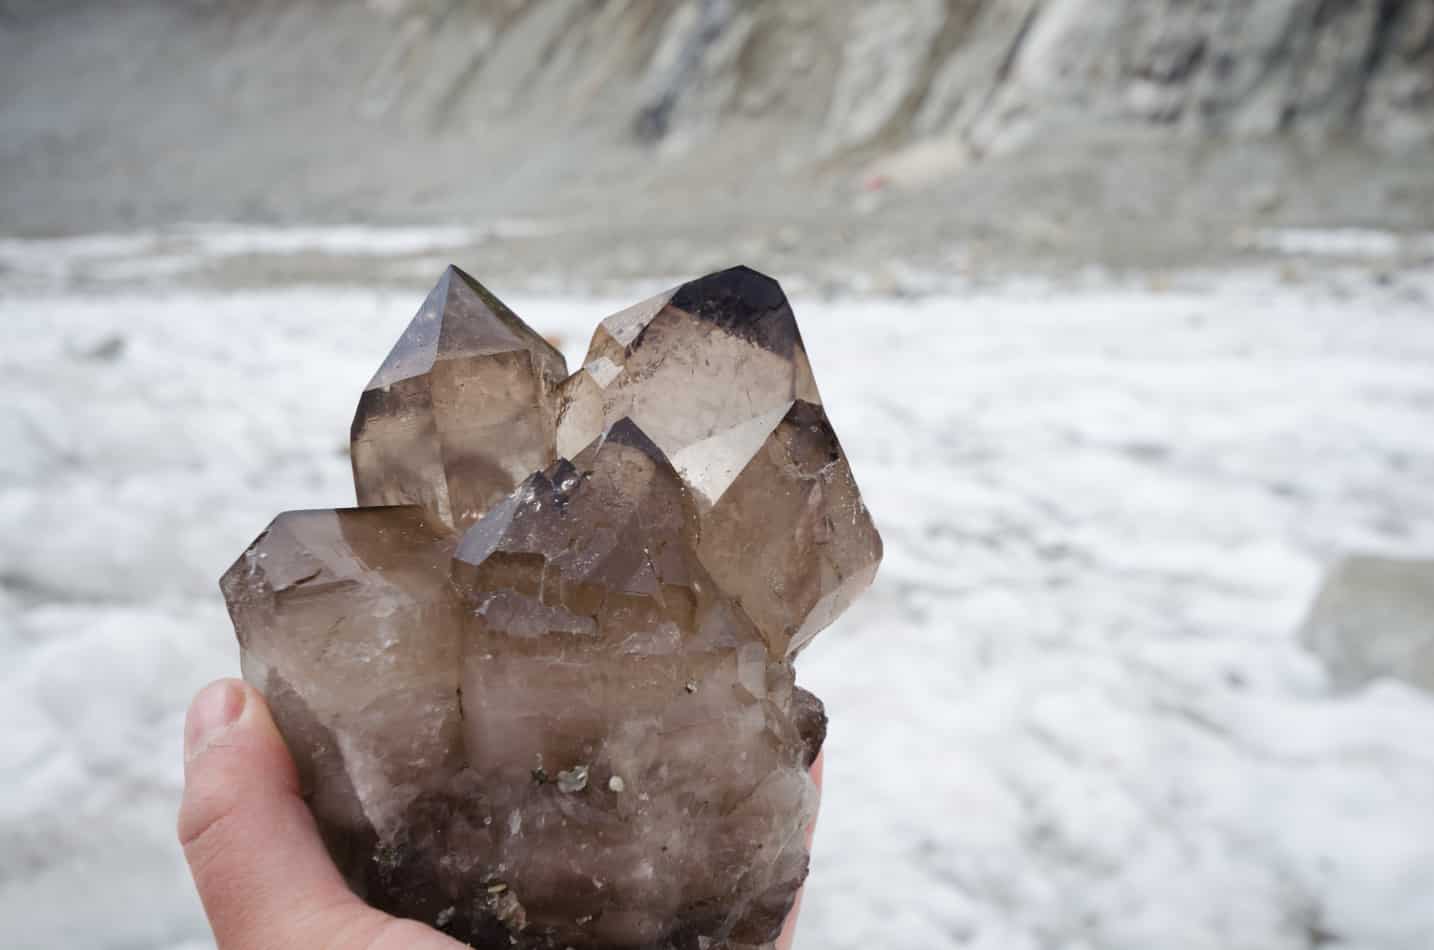 Smoky Quartz being held in a hand